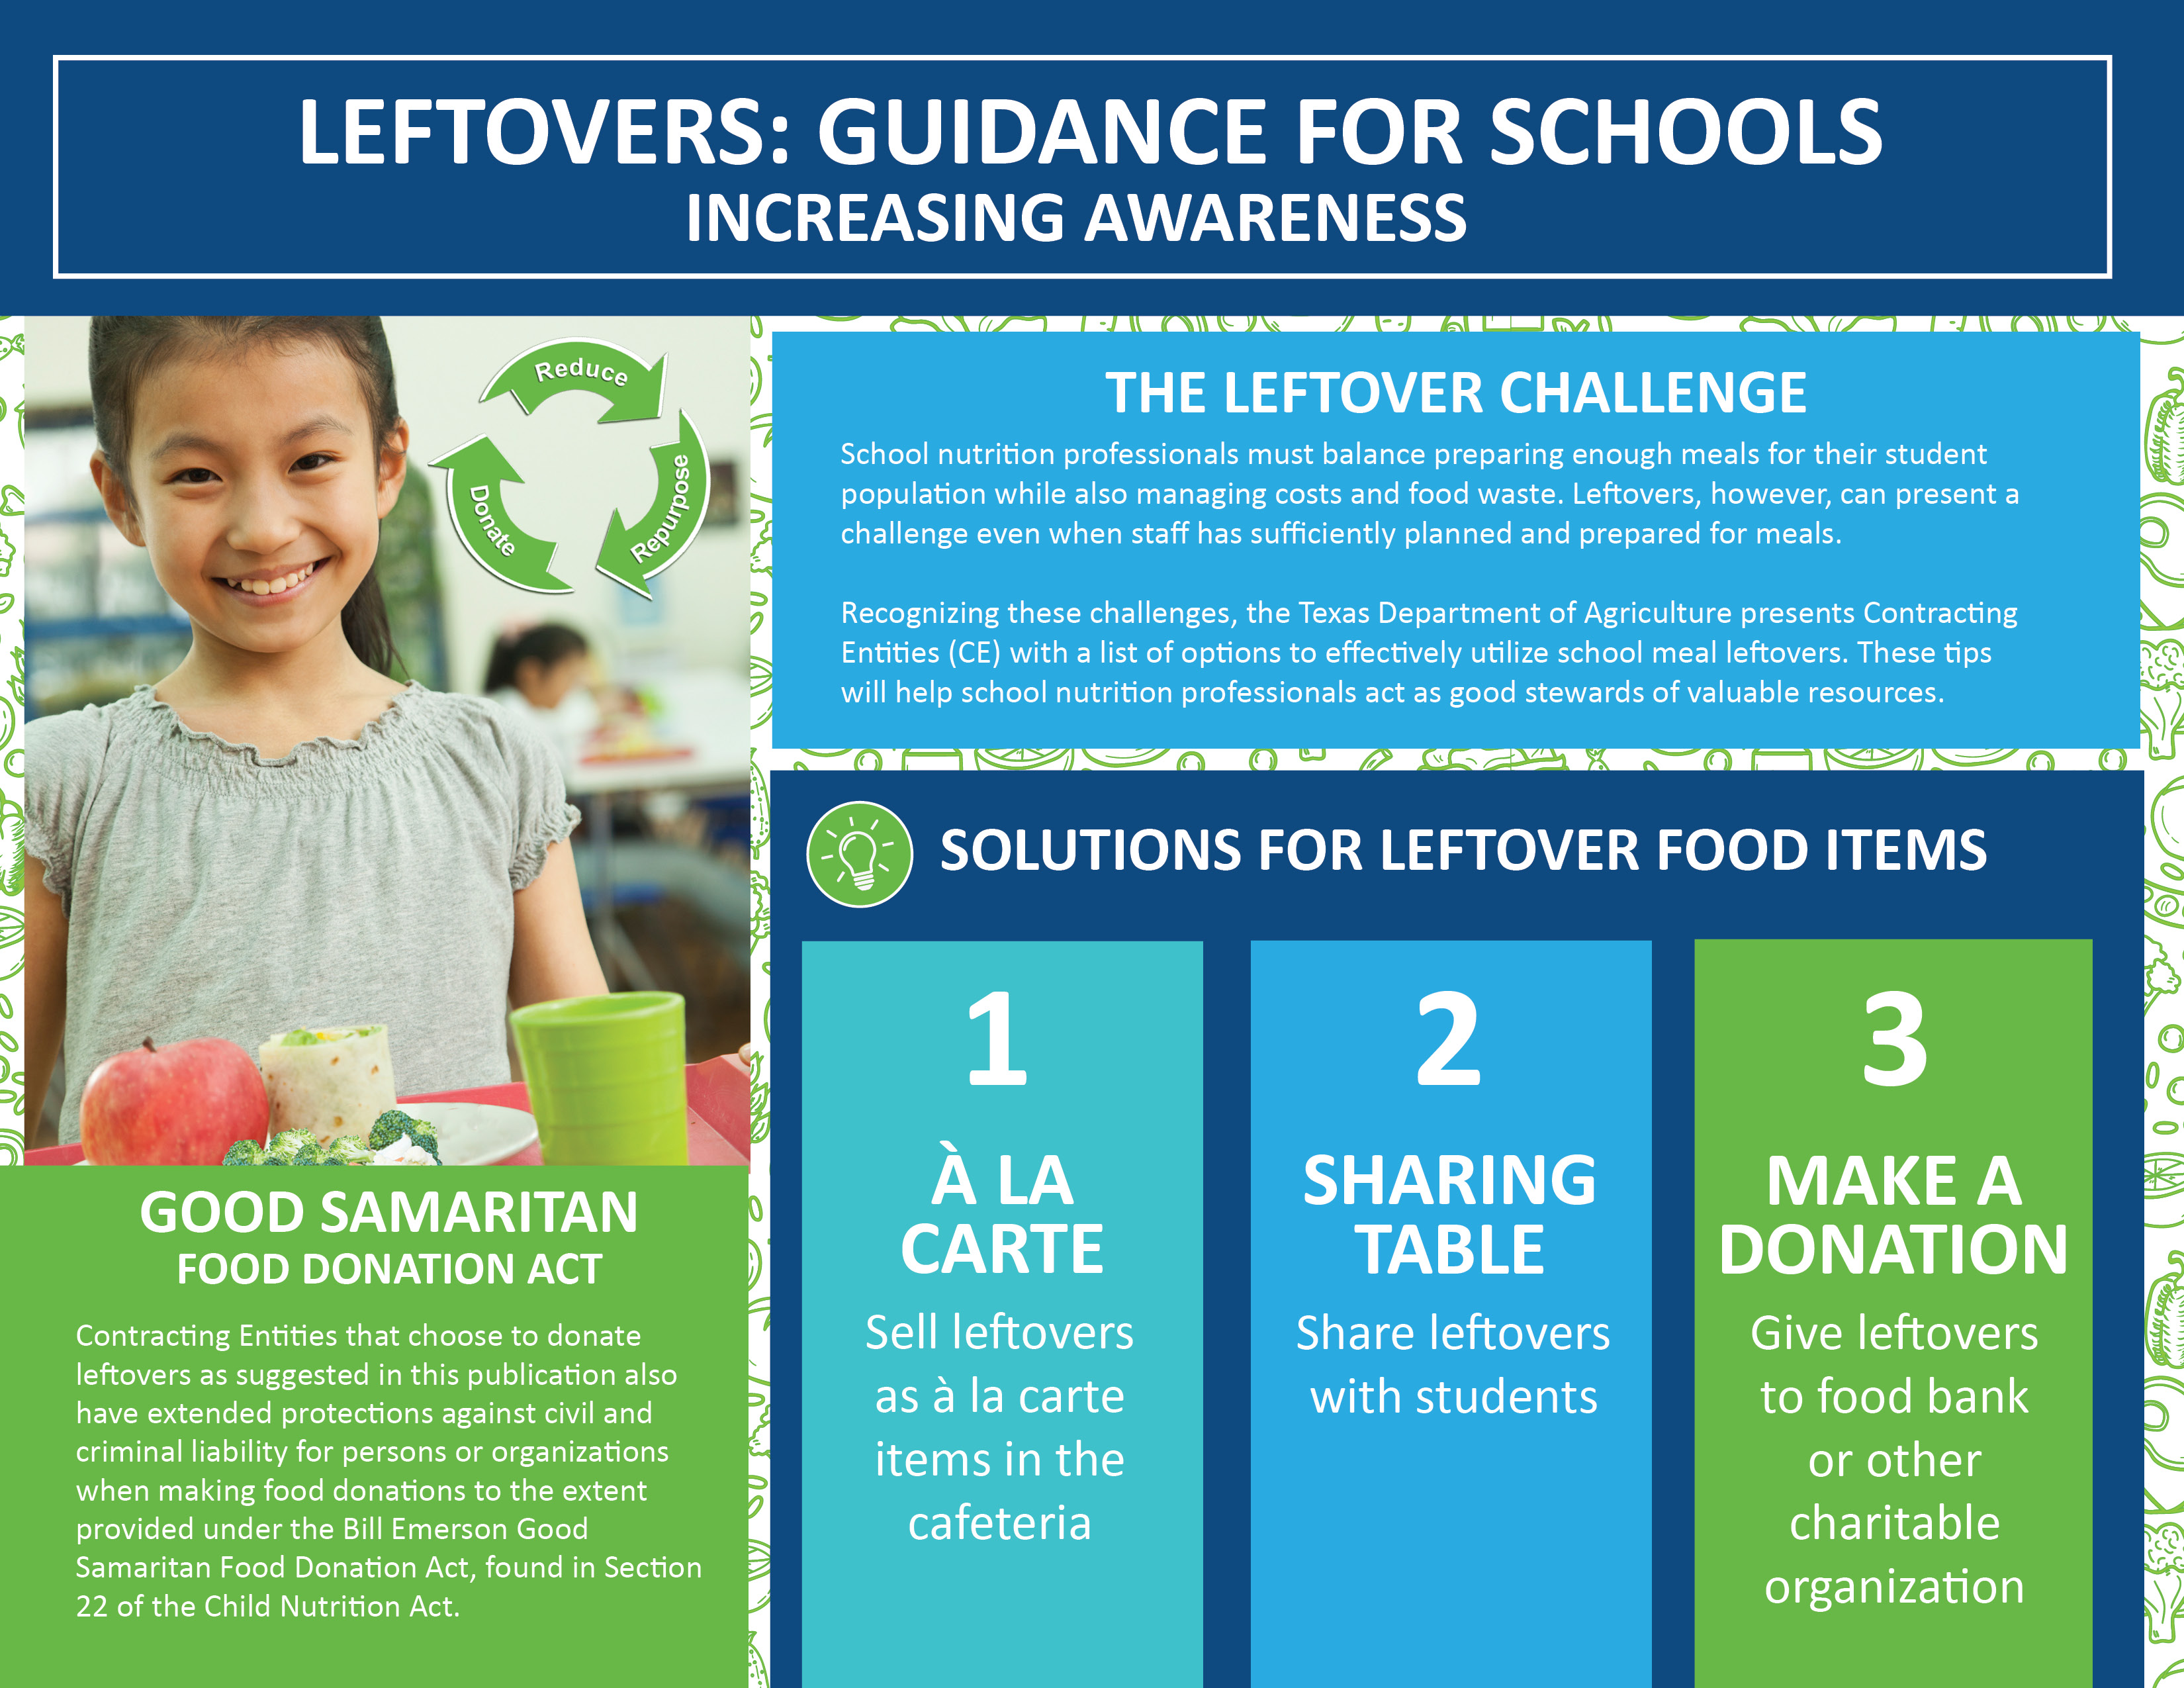 Leftovers: Guidance for Schools